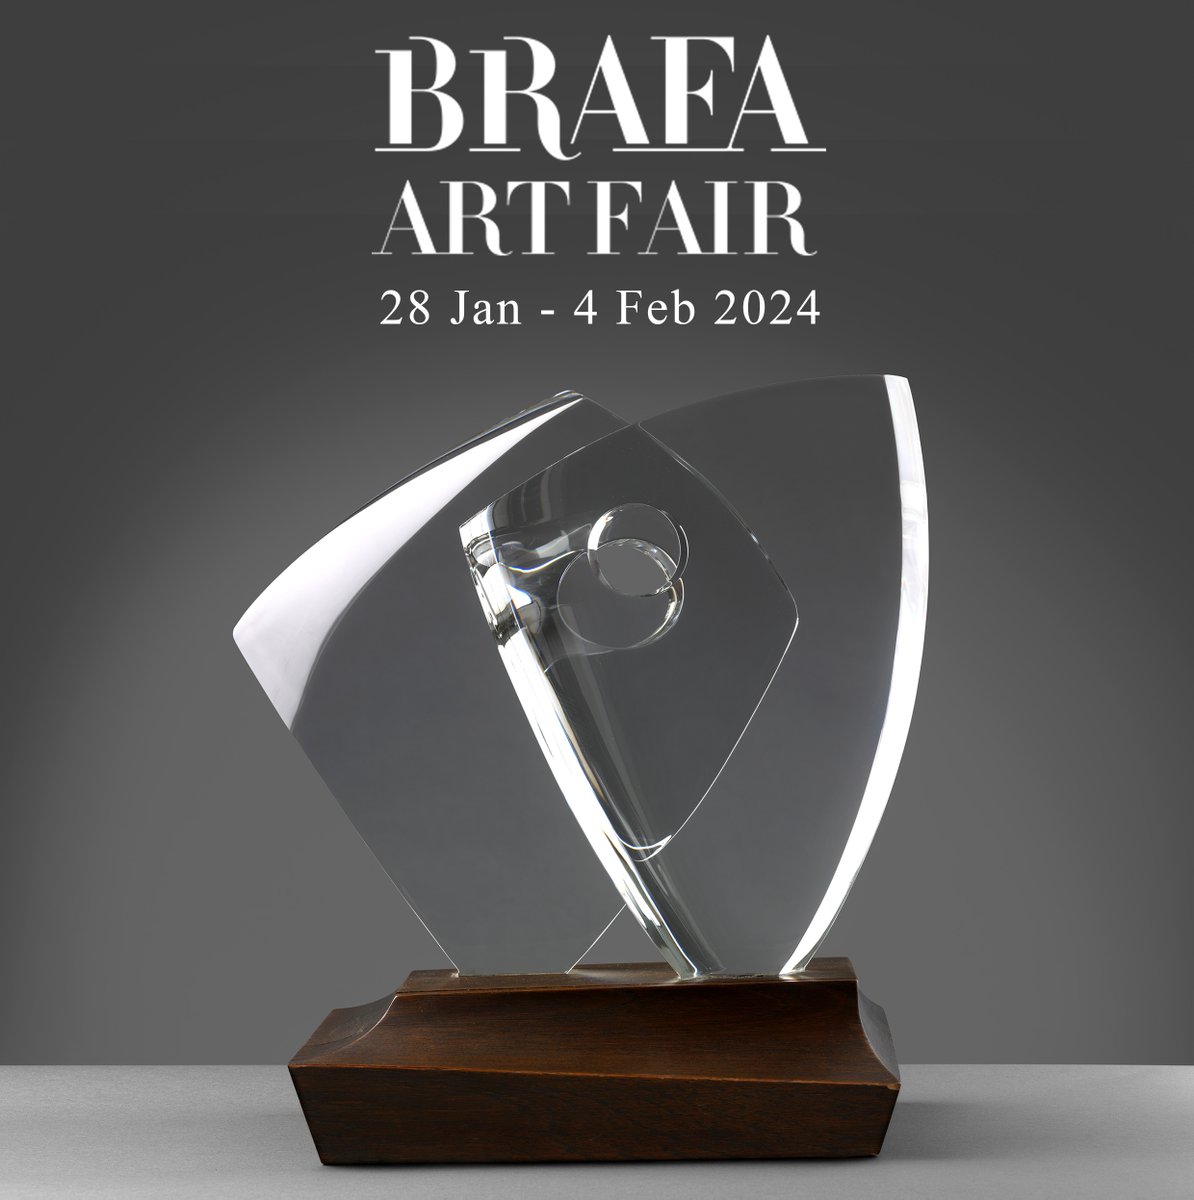 We are delighted to return to BRAFA Art Fair with a curated exhibition of post war British sculpture & paintings.
Follow the link to see our full selection:
osbornesamuel.com/exhibition/bra…
#brafa #brafaartfair #brafa2024 #brusselsexpo #brussels #barbarahepworth #modernbritishart